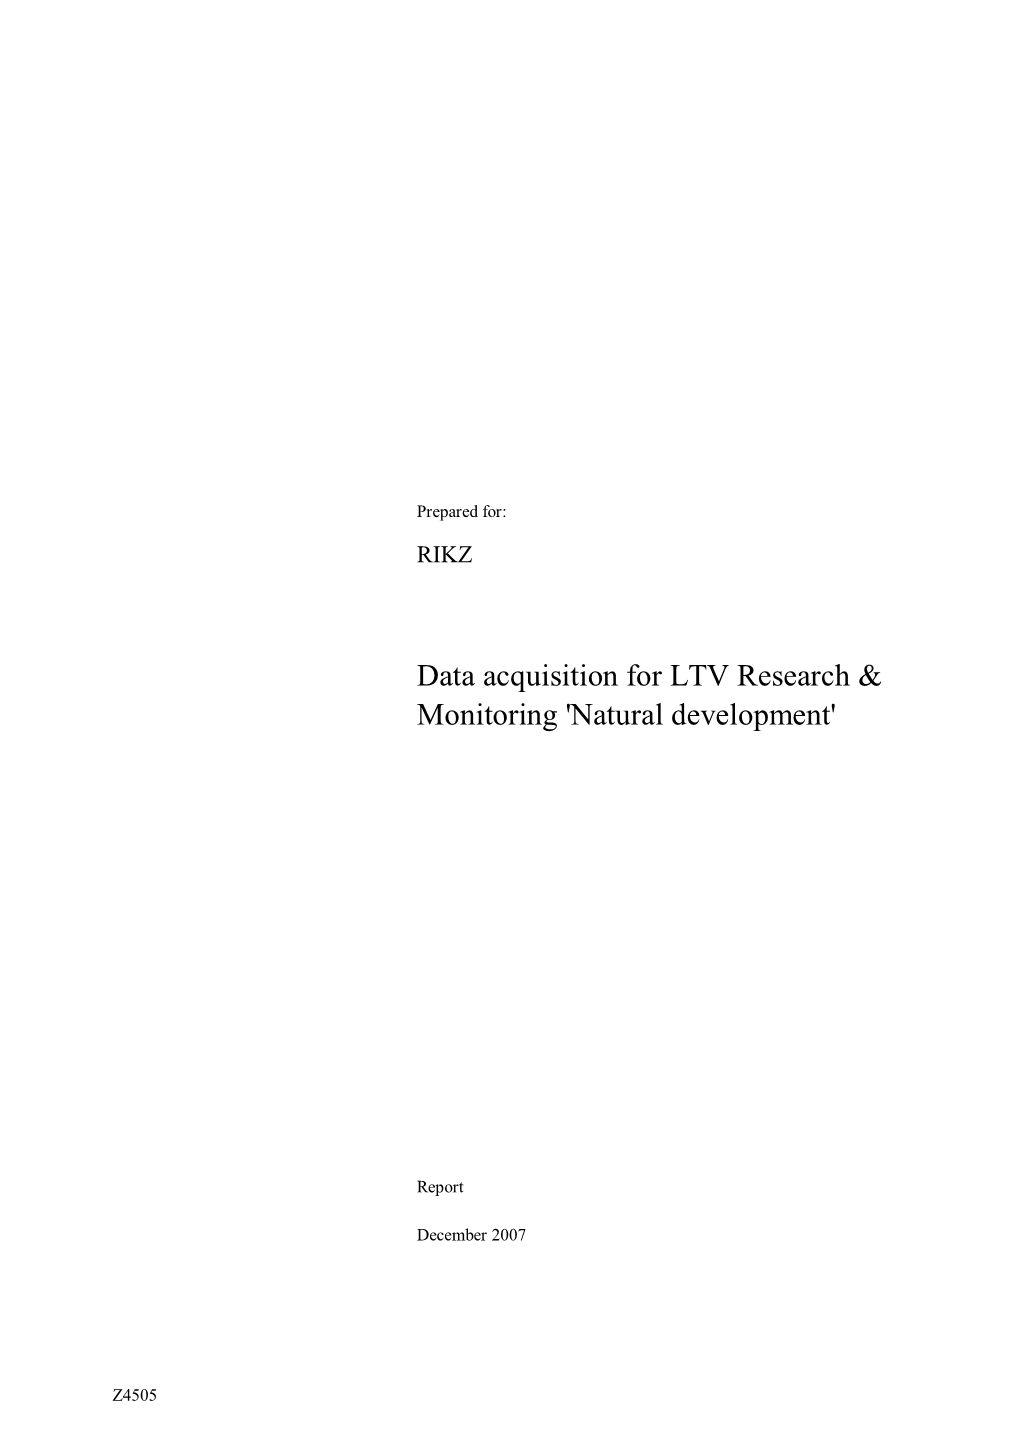 Data Acquisition for LTV Research & Monitoring